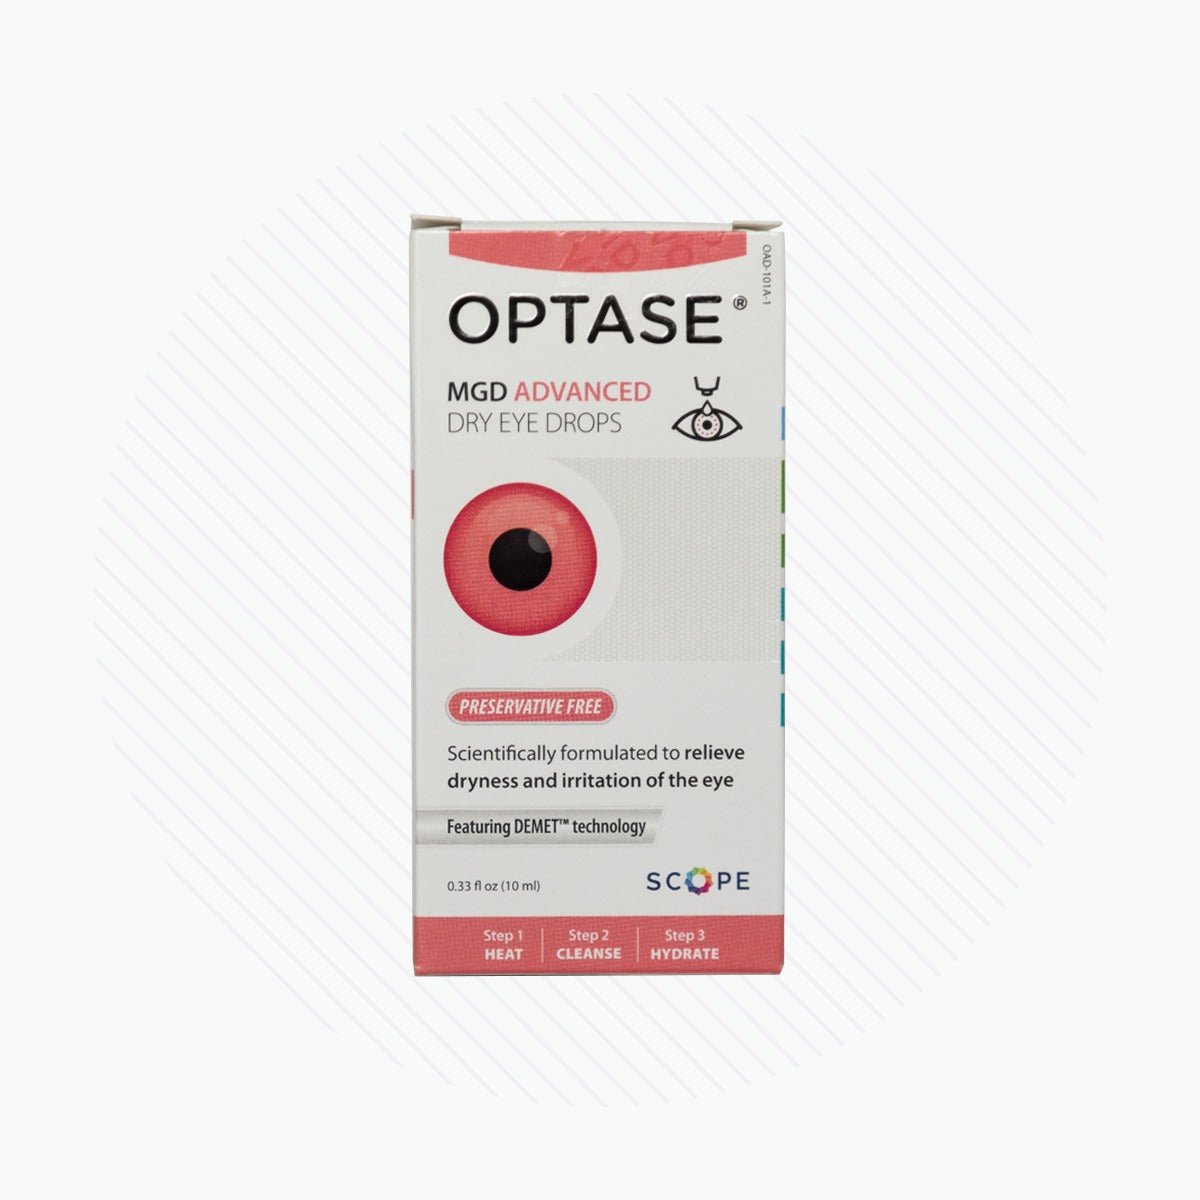 Optase MGD Advanced Dry Eye Drops Preservative-Free 2 Month Supply (300 drops) - DryEye Rescue Store